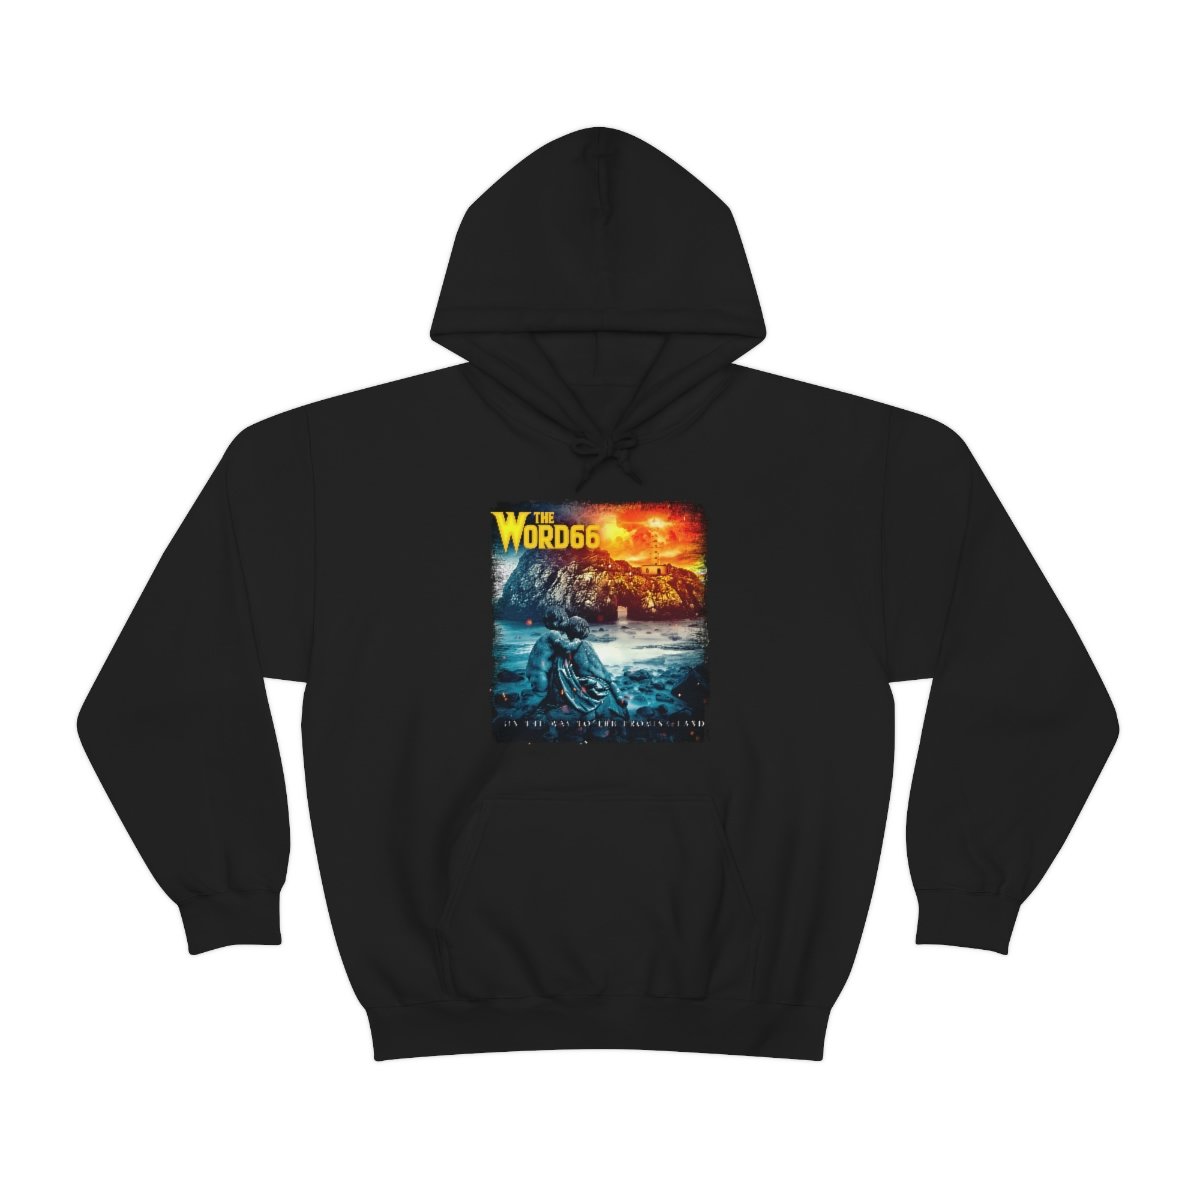 The Word66 – On The Way to The Promised Land Pullover Hooded Sweatshirt